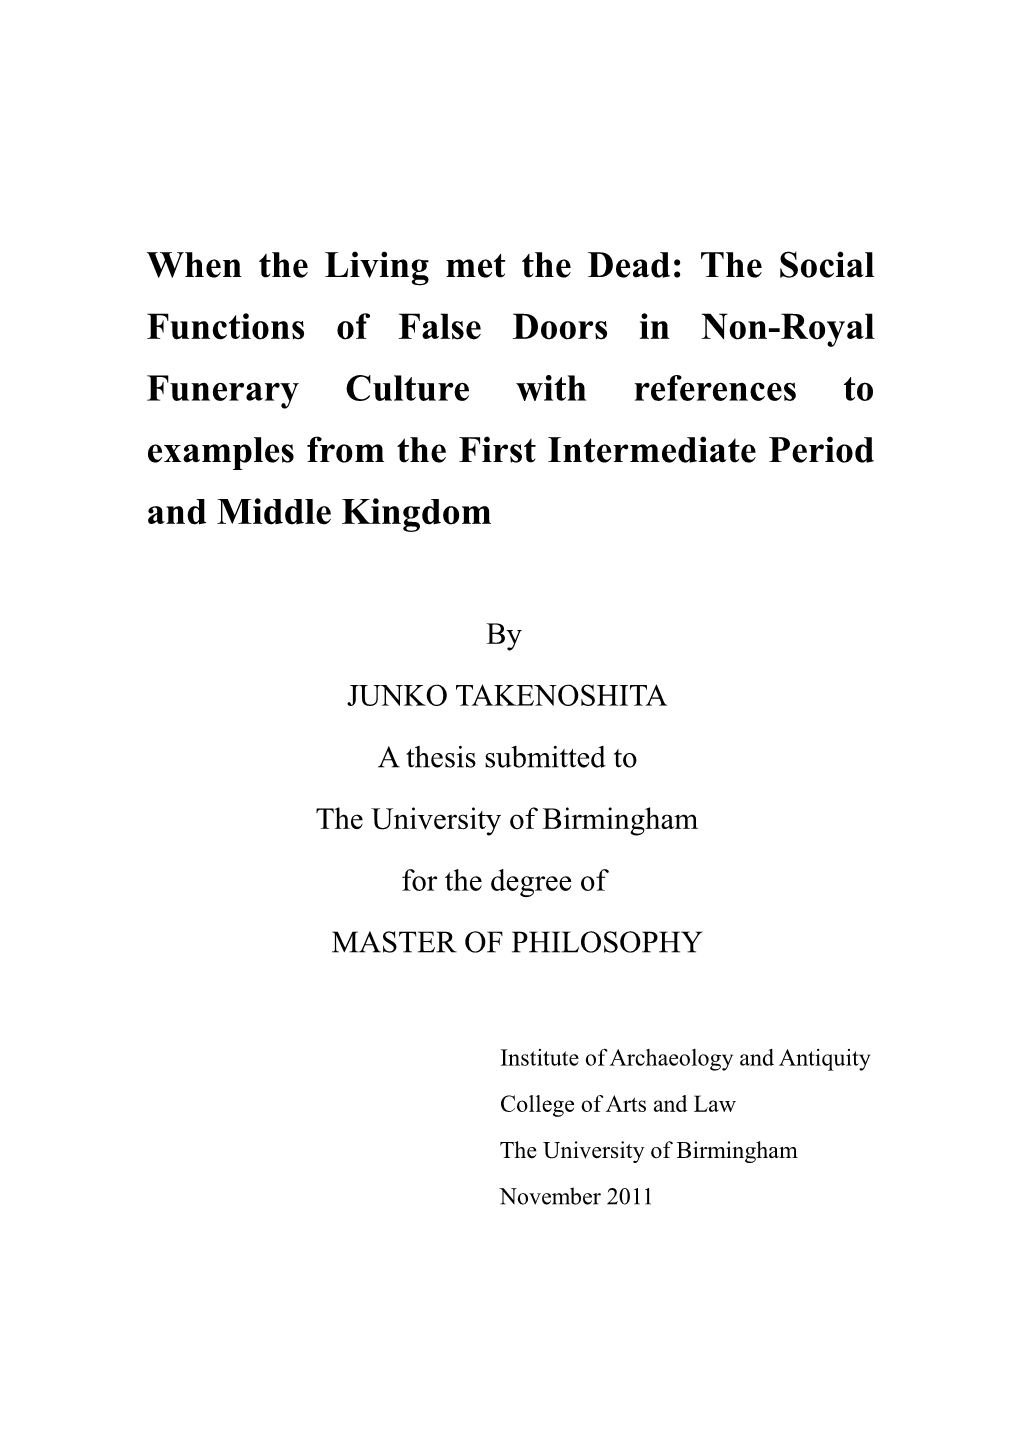 The Social Functions of False Doors in Non-Royal Funerary Culture with References to Examples from the First Intermediate Period and Middle Kingdom